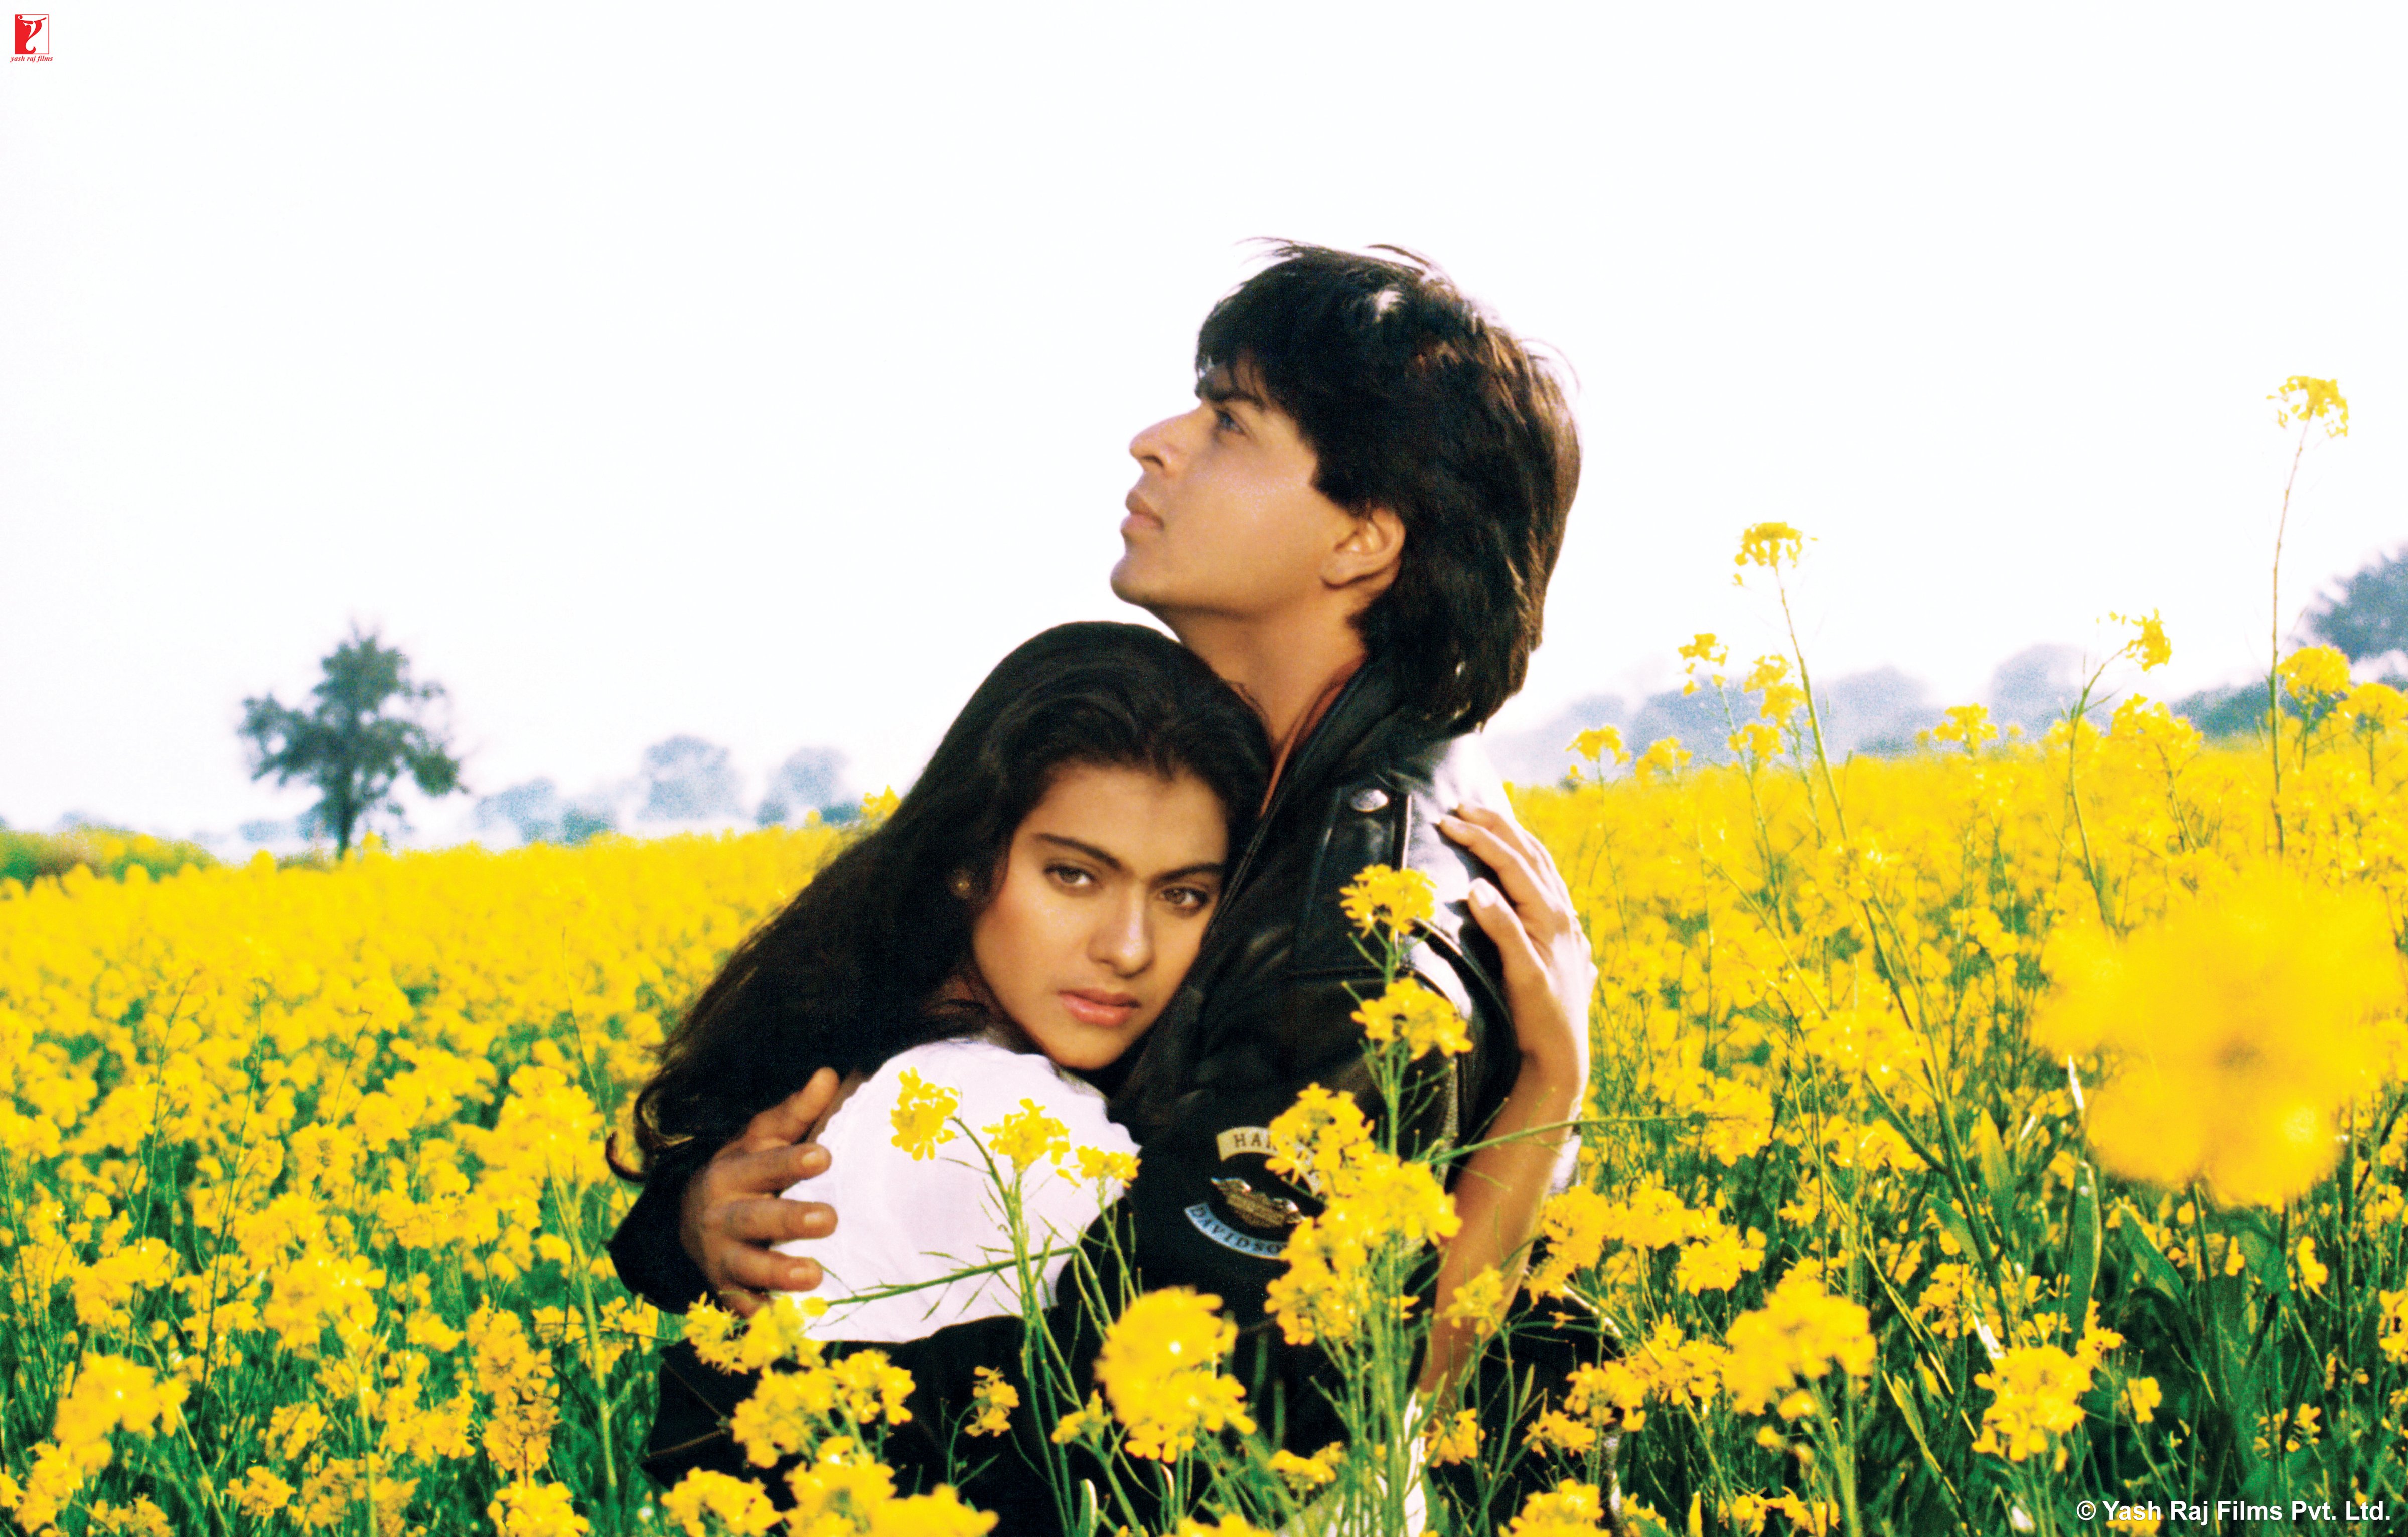 A still from the 1995 film 'Dilwale Dulhania Le Jayenge,' featured in Netflix's 'The Romantics' (Courtesy of Netflix)